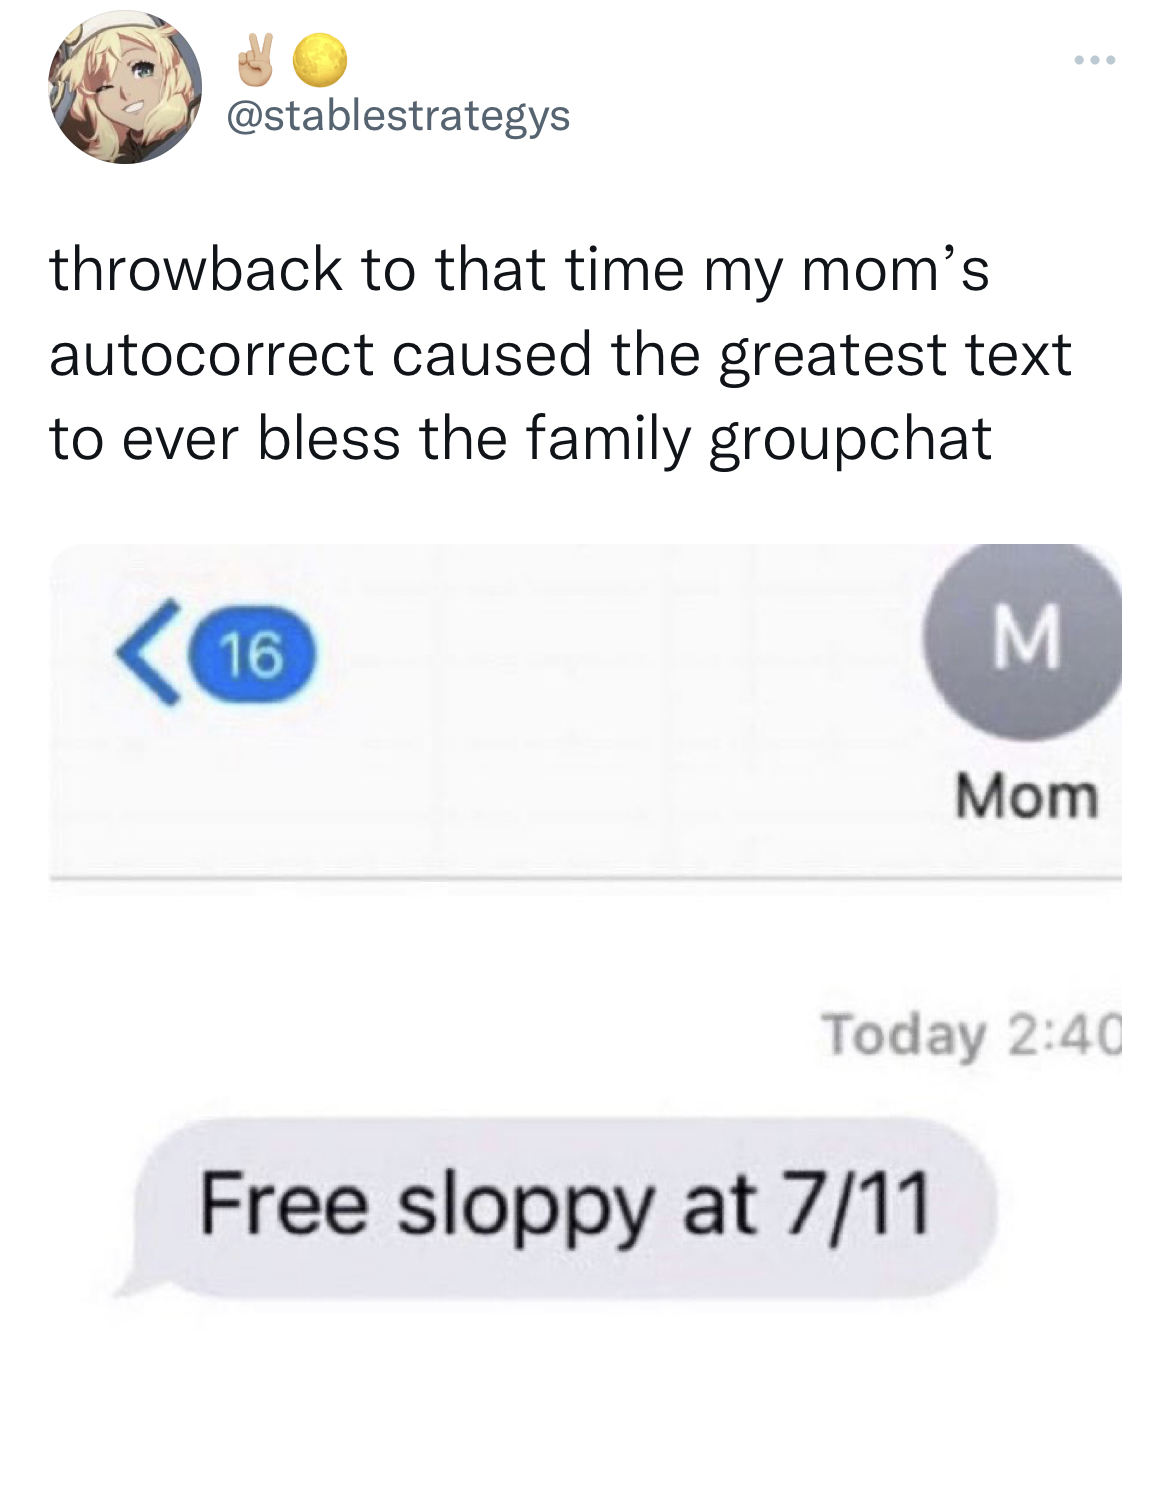 savage tweets - free sloppy at 7 11 meme - throwback to that time my mom's autocorrect caused the greatest text to ever bless the family groupchat 16 M Free sloppy at 711 Mom Today